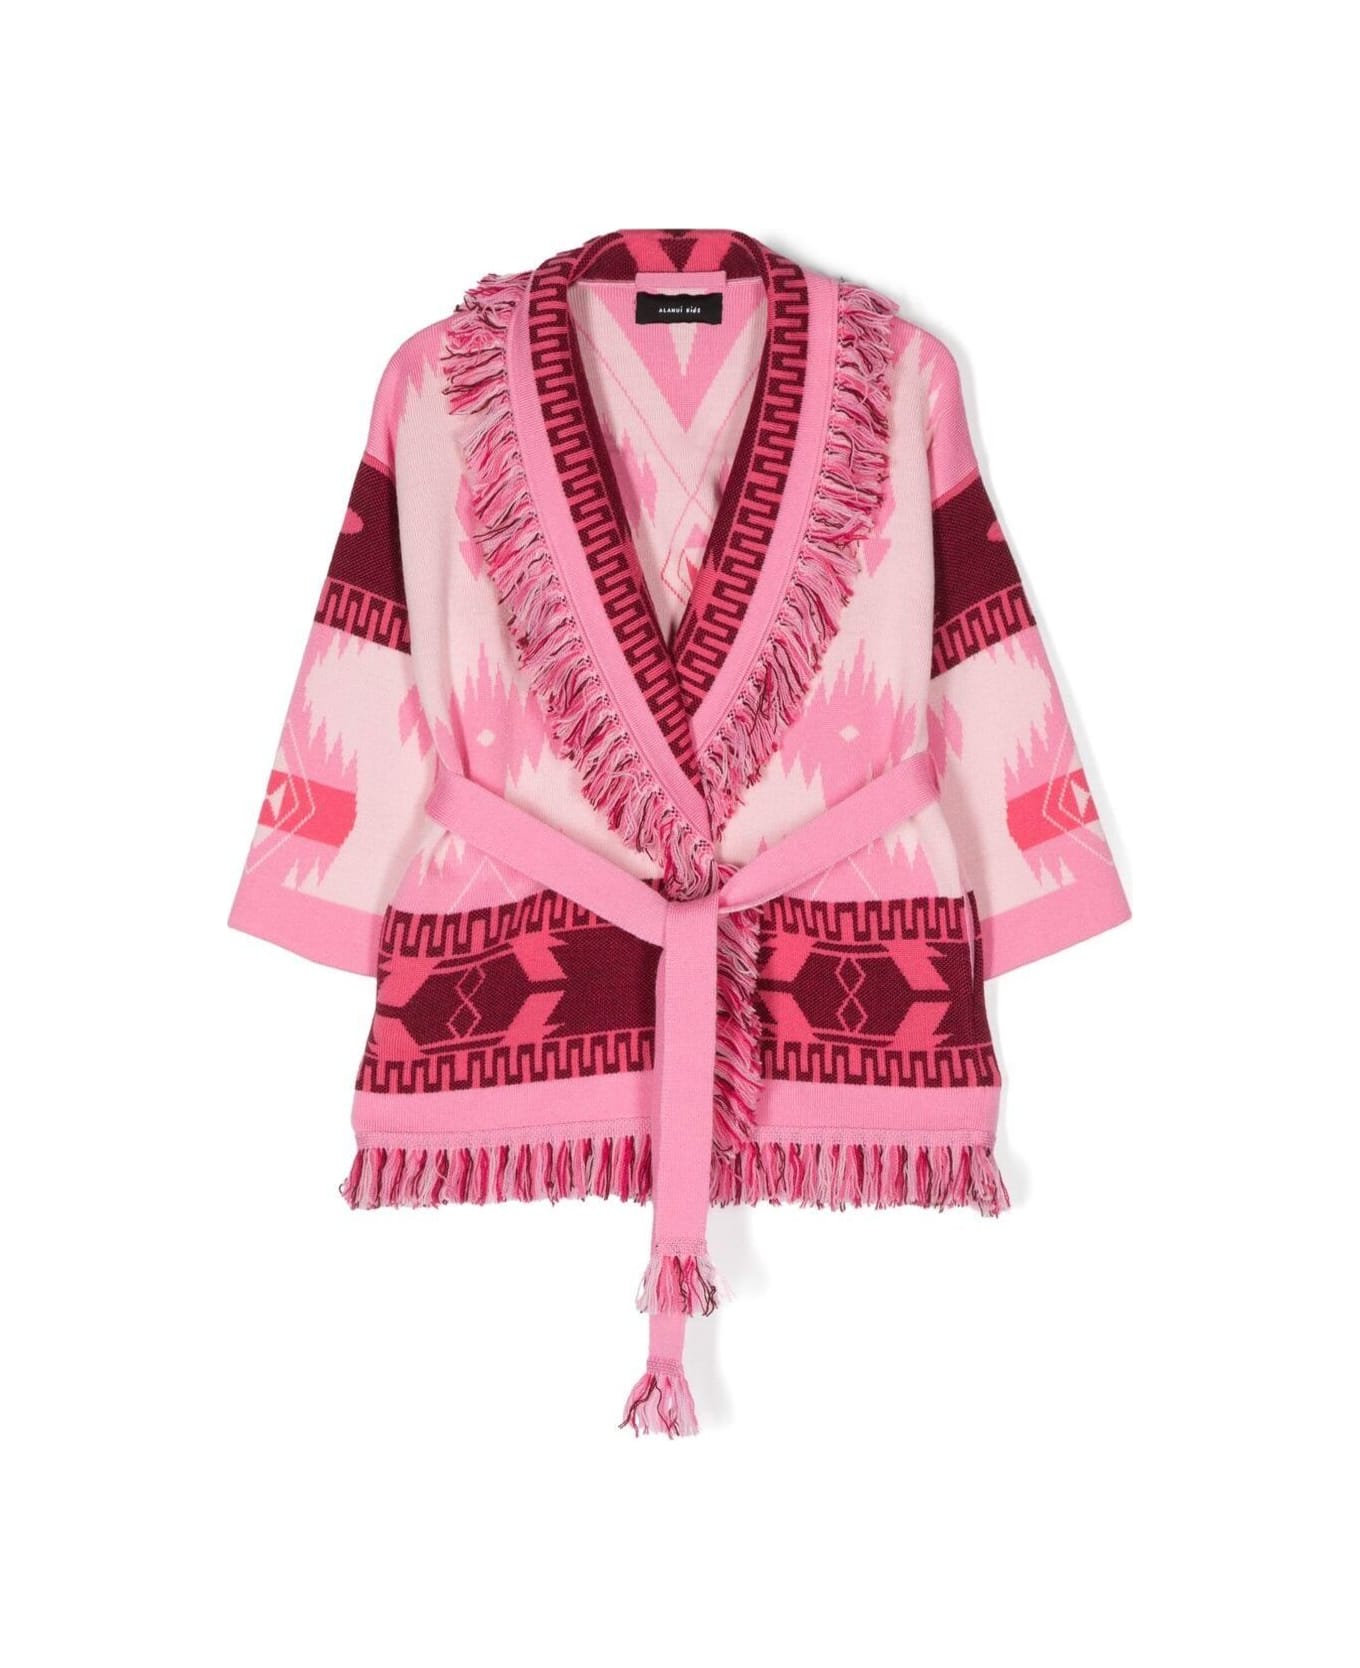 Alanui Pink Cardigan With Graphic Jacquard Motif All-over In Wool - Pink